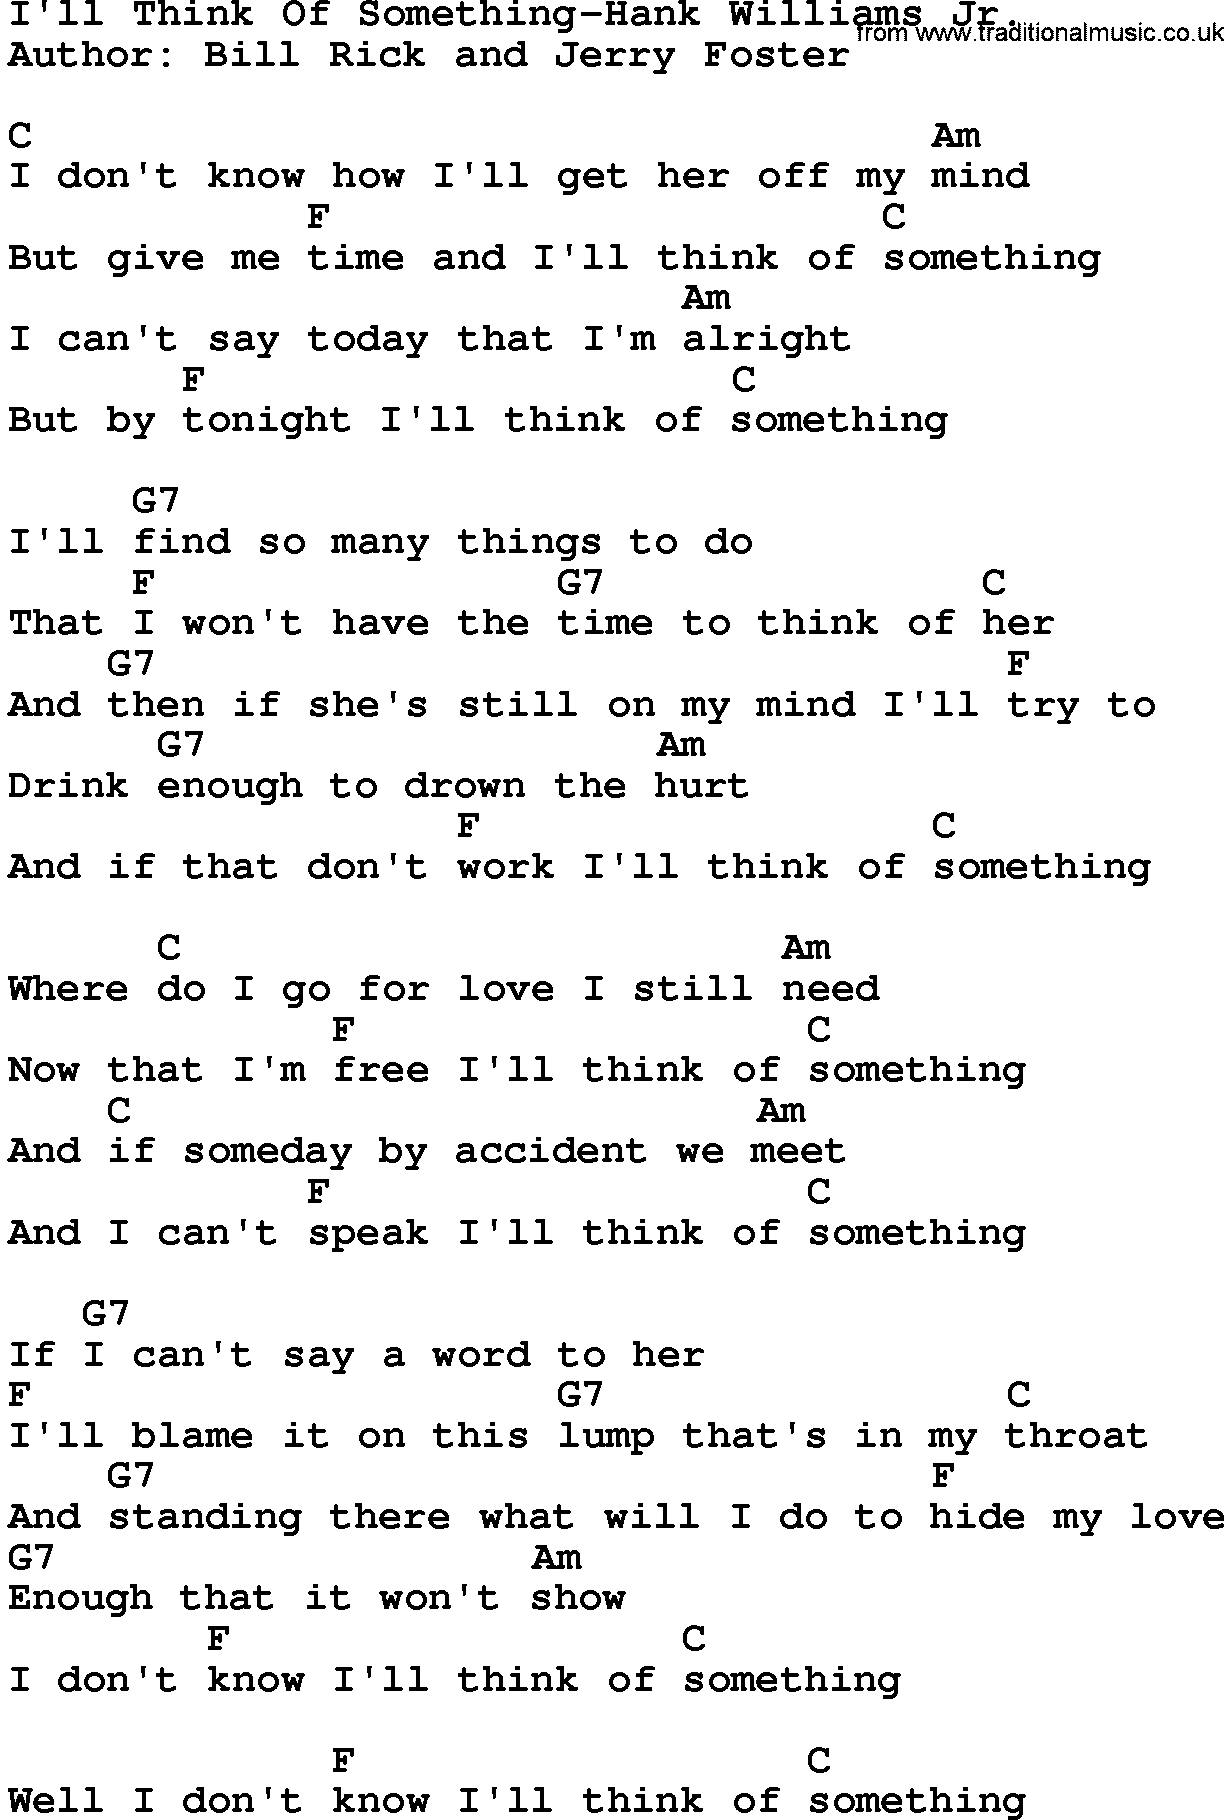 Country music song: I'll Think Of Something-Hank Williams Jr lyrics and chords